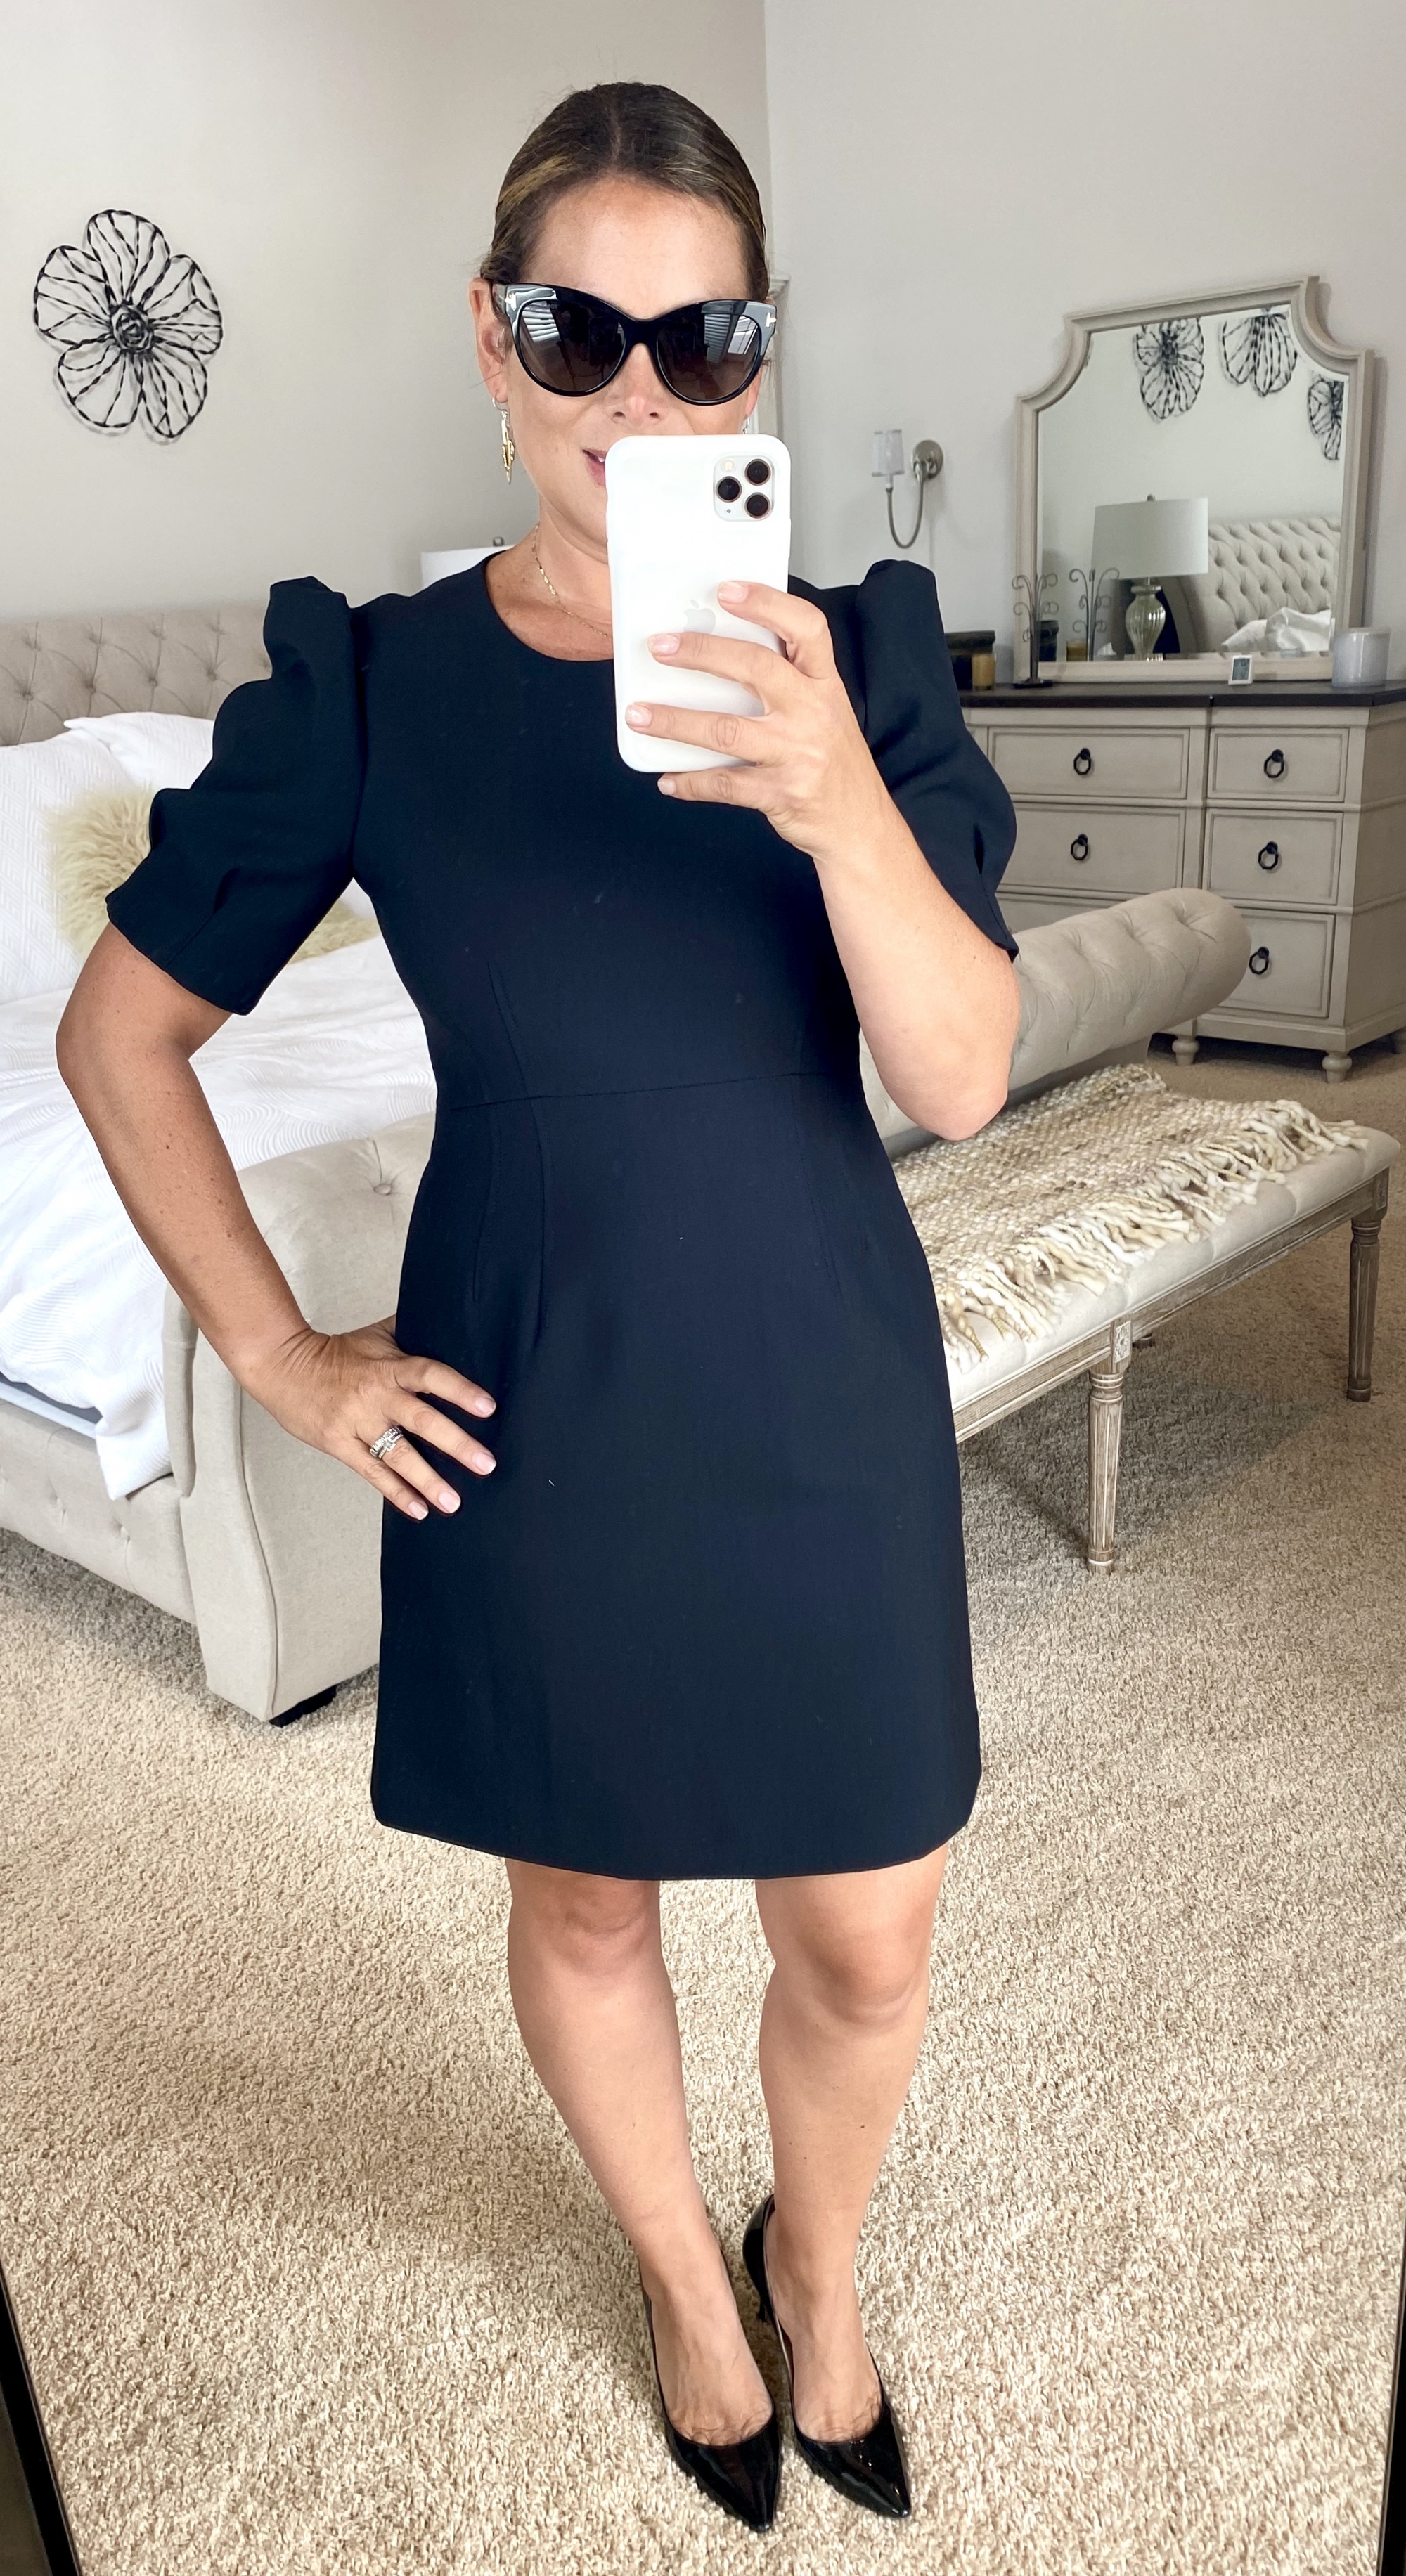 Nordstrom Sale Favorites, Denise The Busbee Style Hive Community Manager Wearing A Black Veronica Beard Puff Sleeve Dress With Black Jimmy Choo Pumps